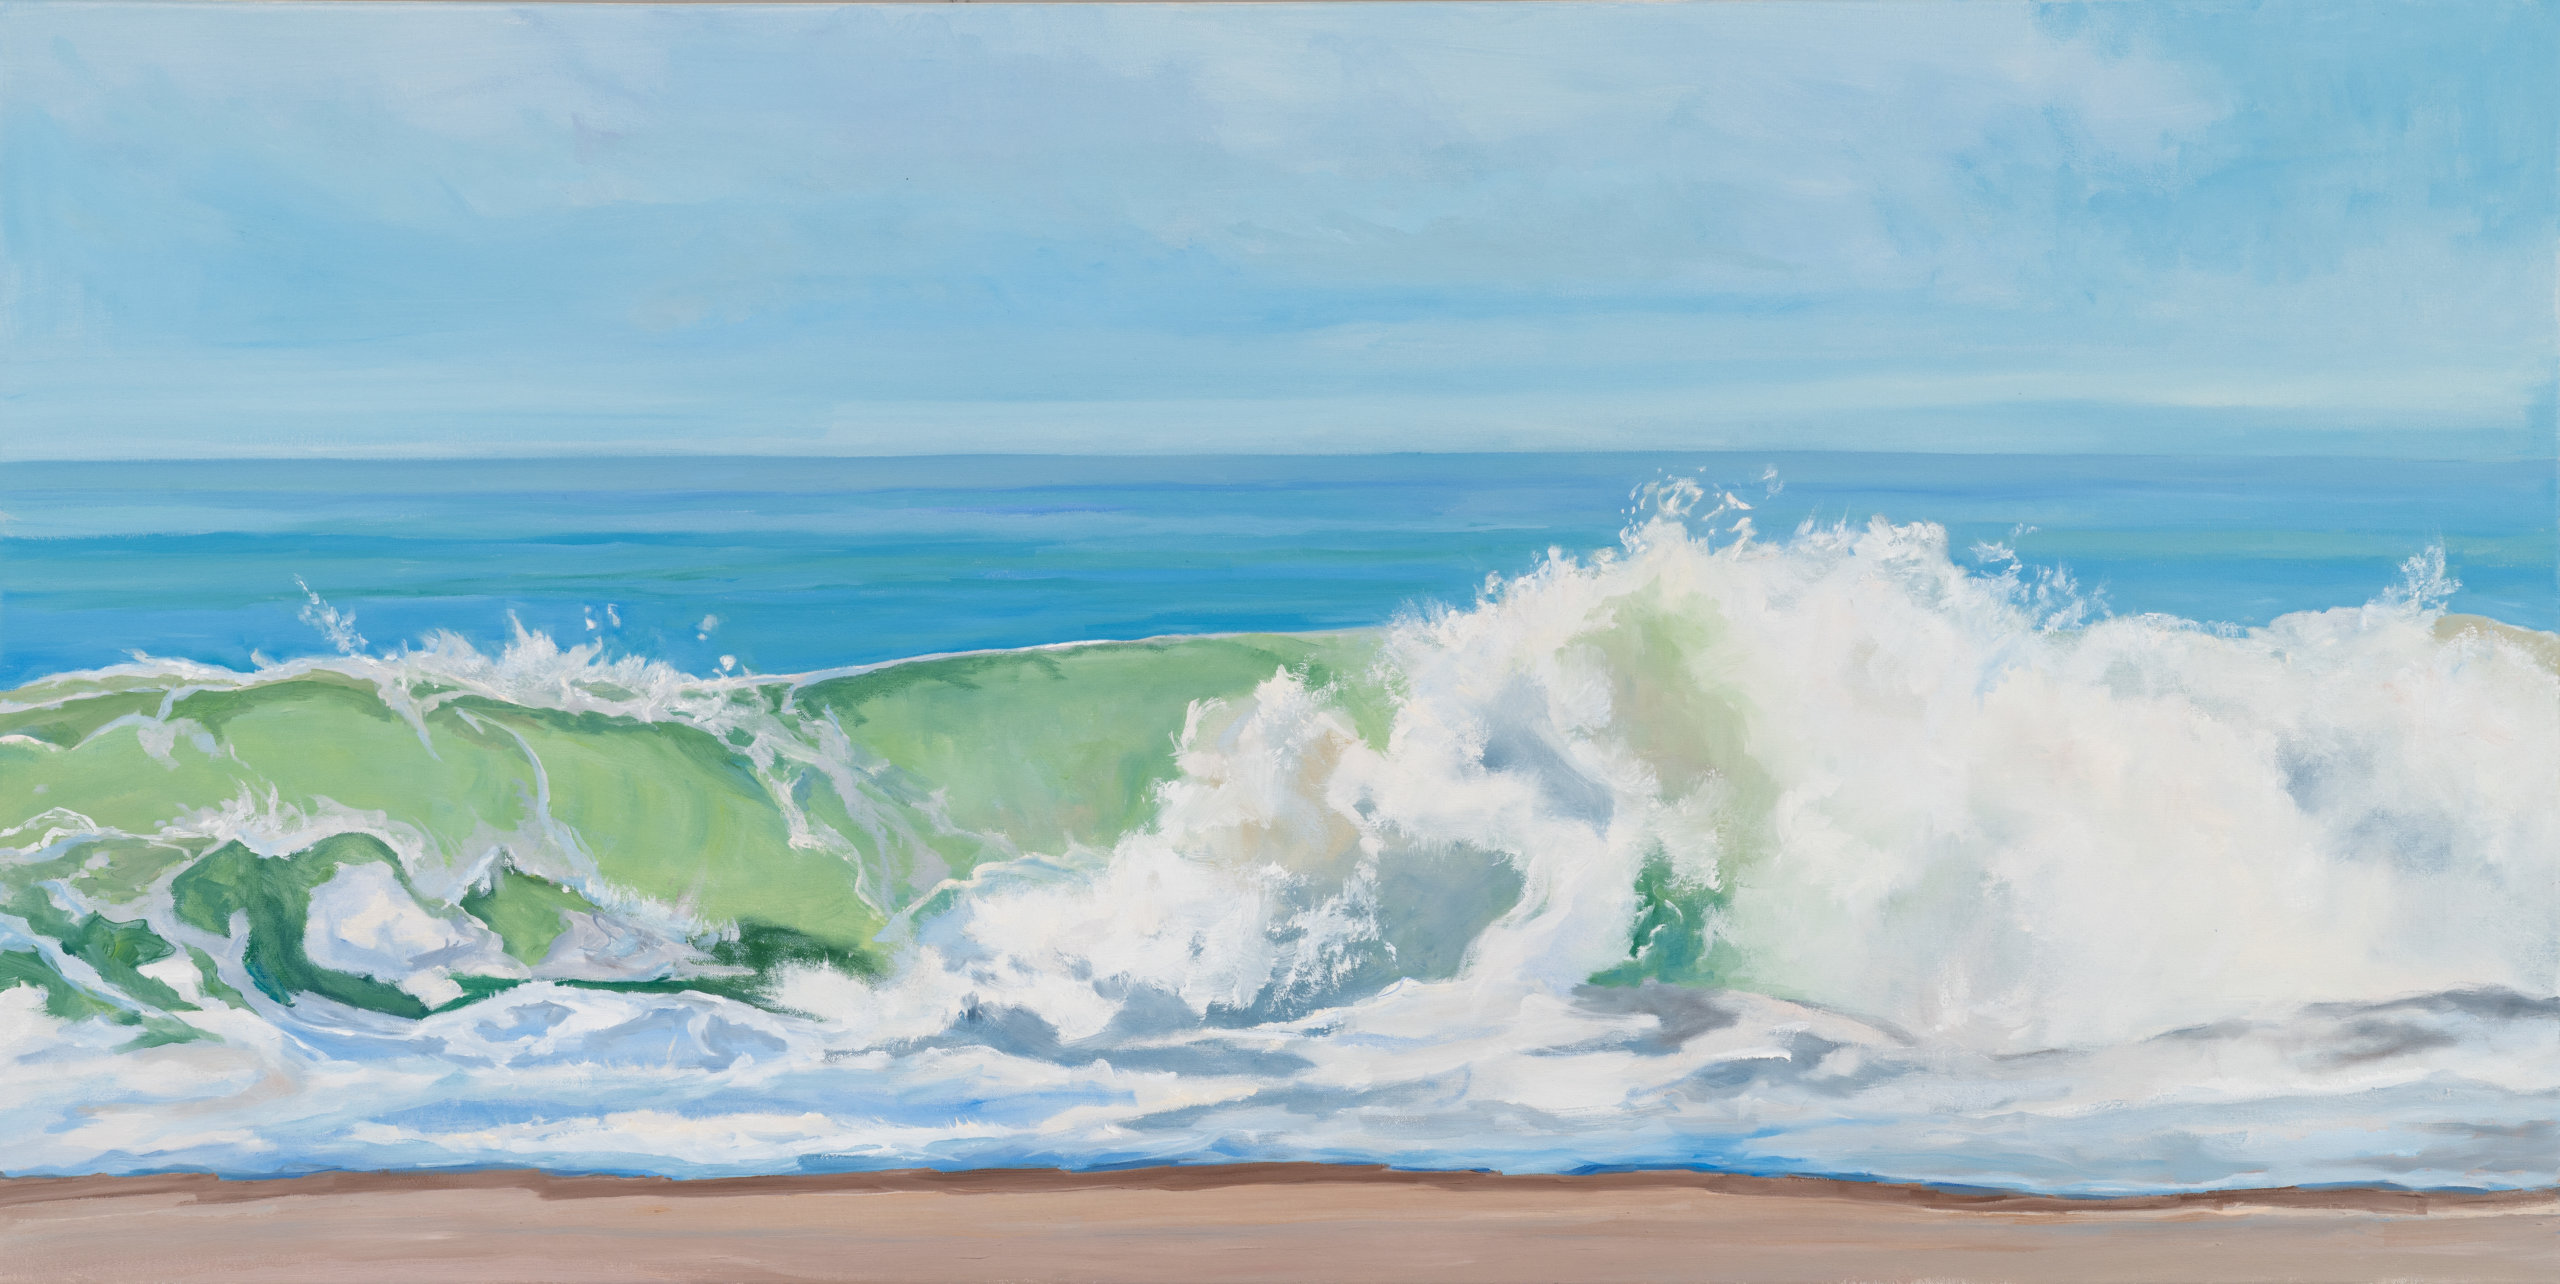 Casey Chalem Anderson "Lime Surf" (2020, oil on canvas, 24" x 48")